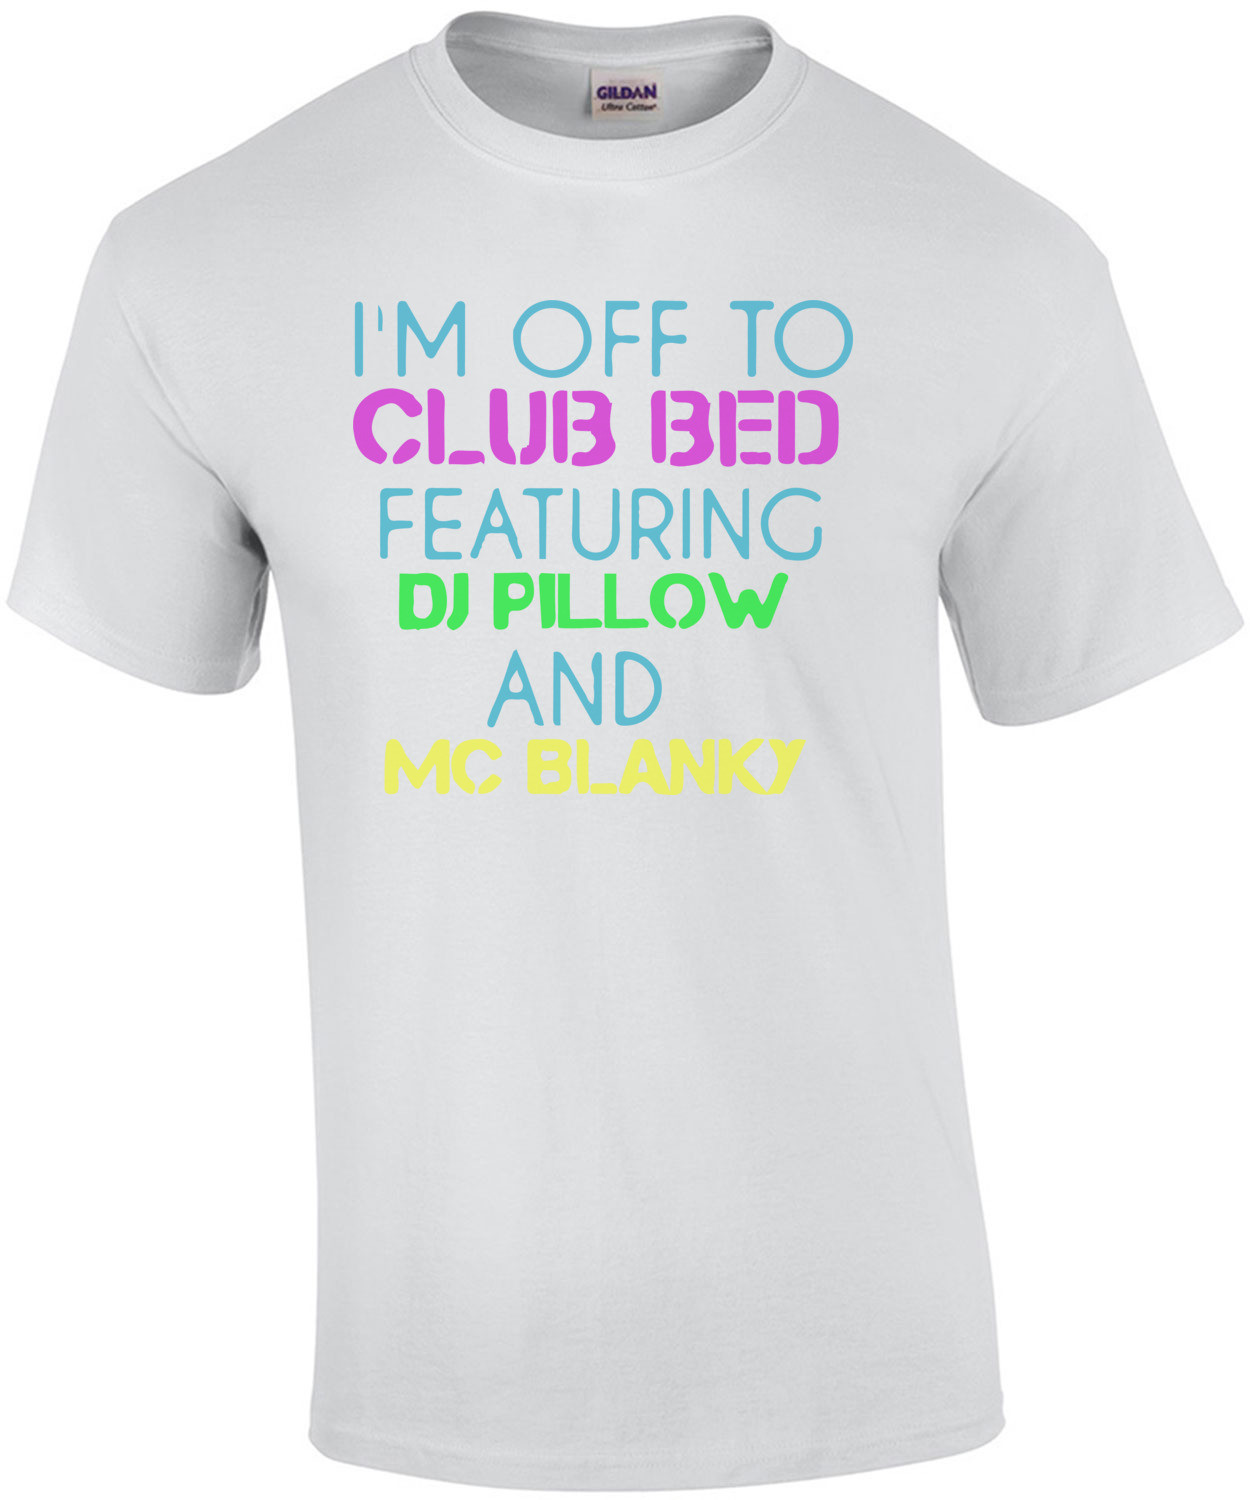 I'm off to club bed featuring dj pillow and mc blanky